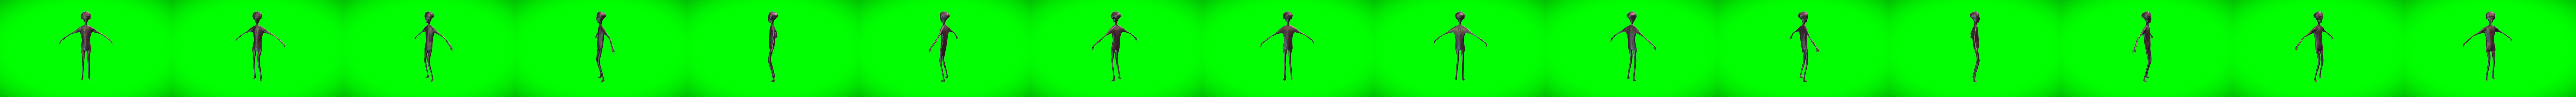 Howard The Alien Download Free 3d Model By Timeforrick Timeforrick F995f92 Sketchfab - dame tu cosita roblox id song how to get free robux on ios